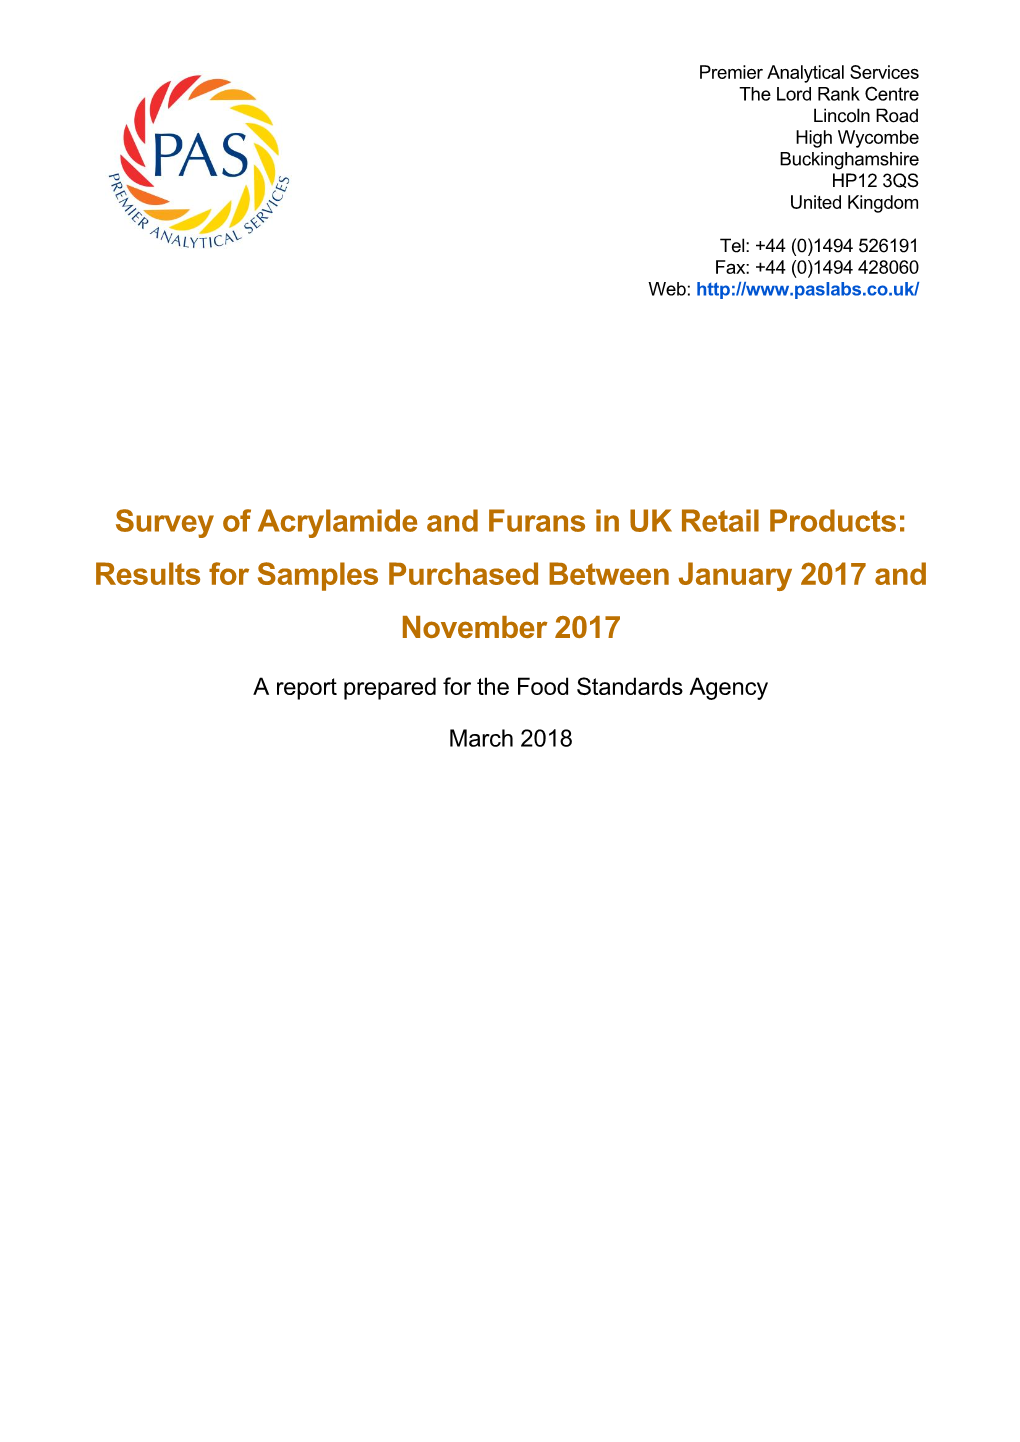 Survey of Acrylamide and Furans in UK Retail Products: Results for Samples Purchased Between January 2017 and November 2017